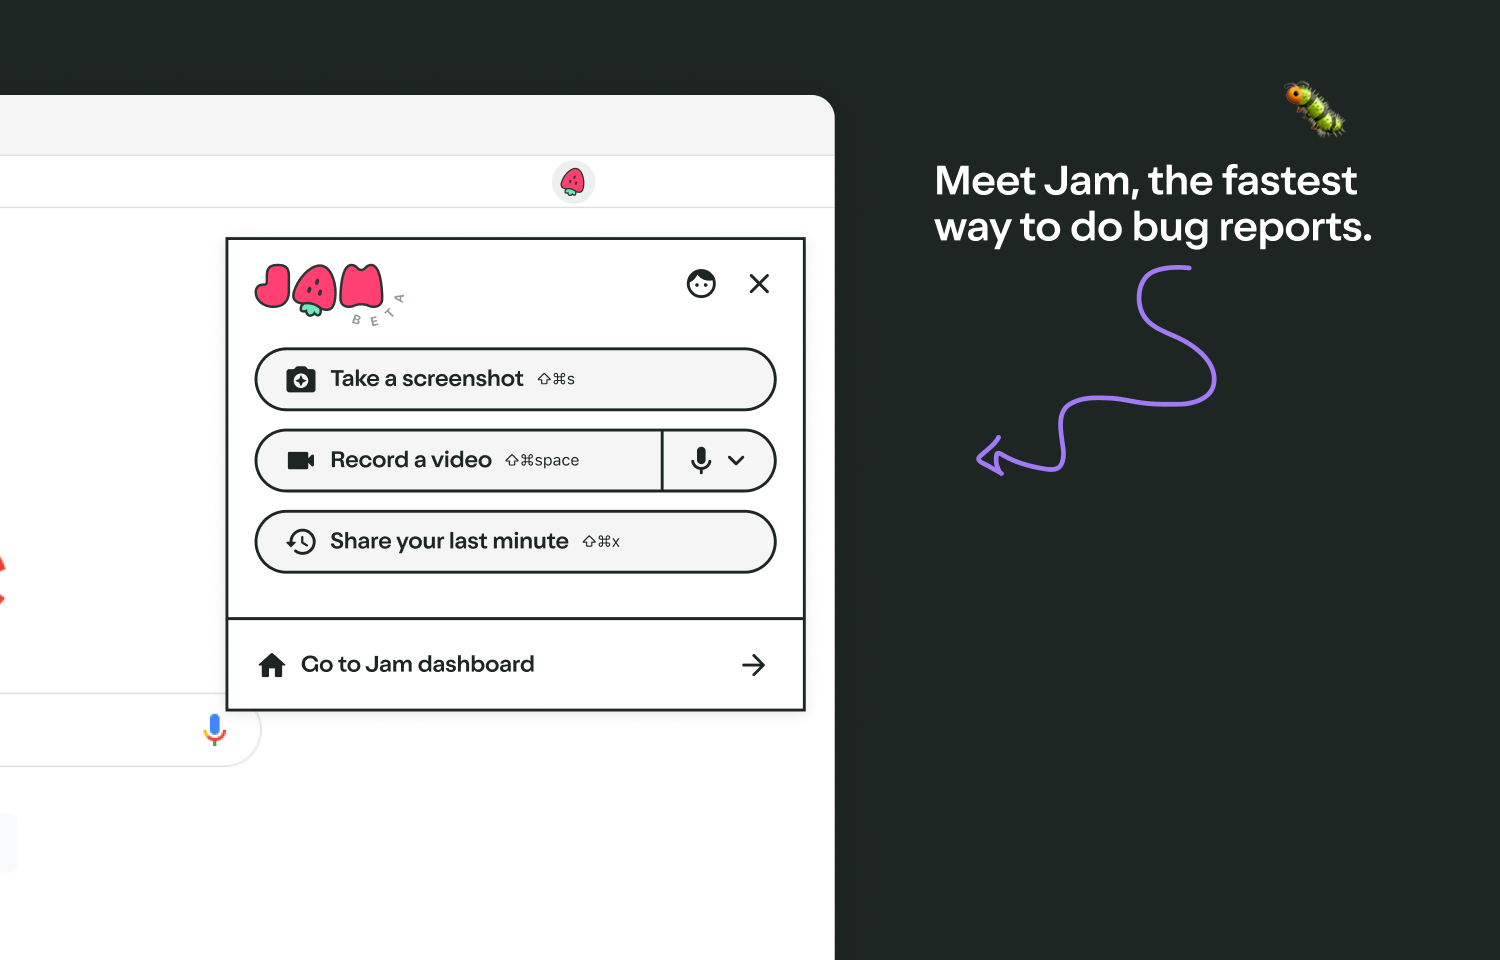 Meet Jam, the fastest way to do bug reports.